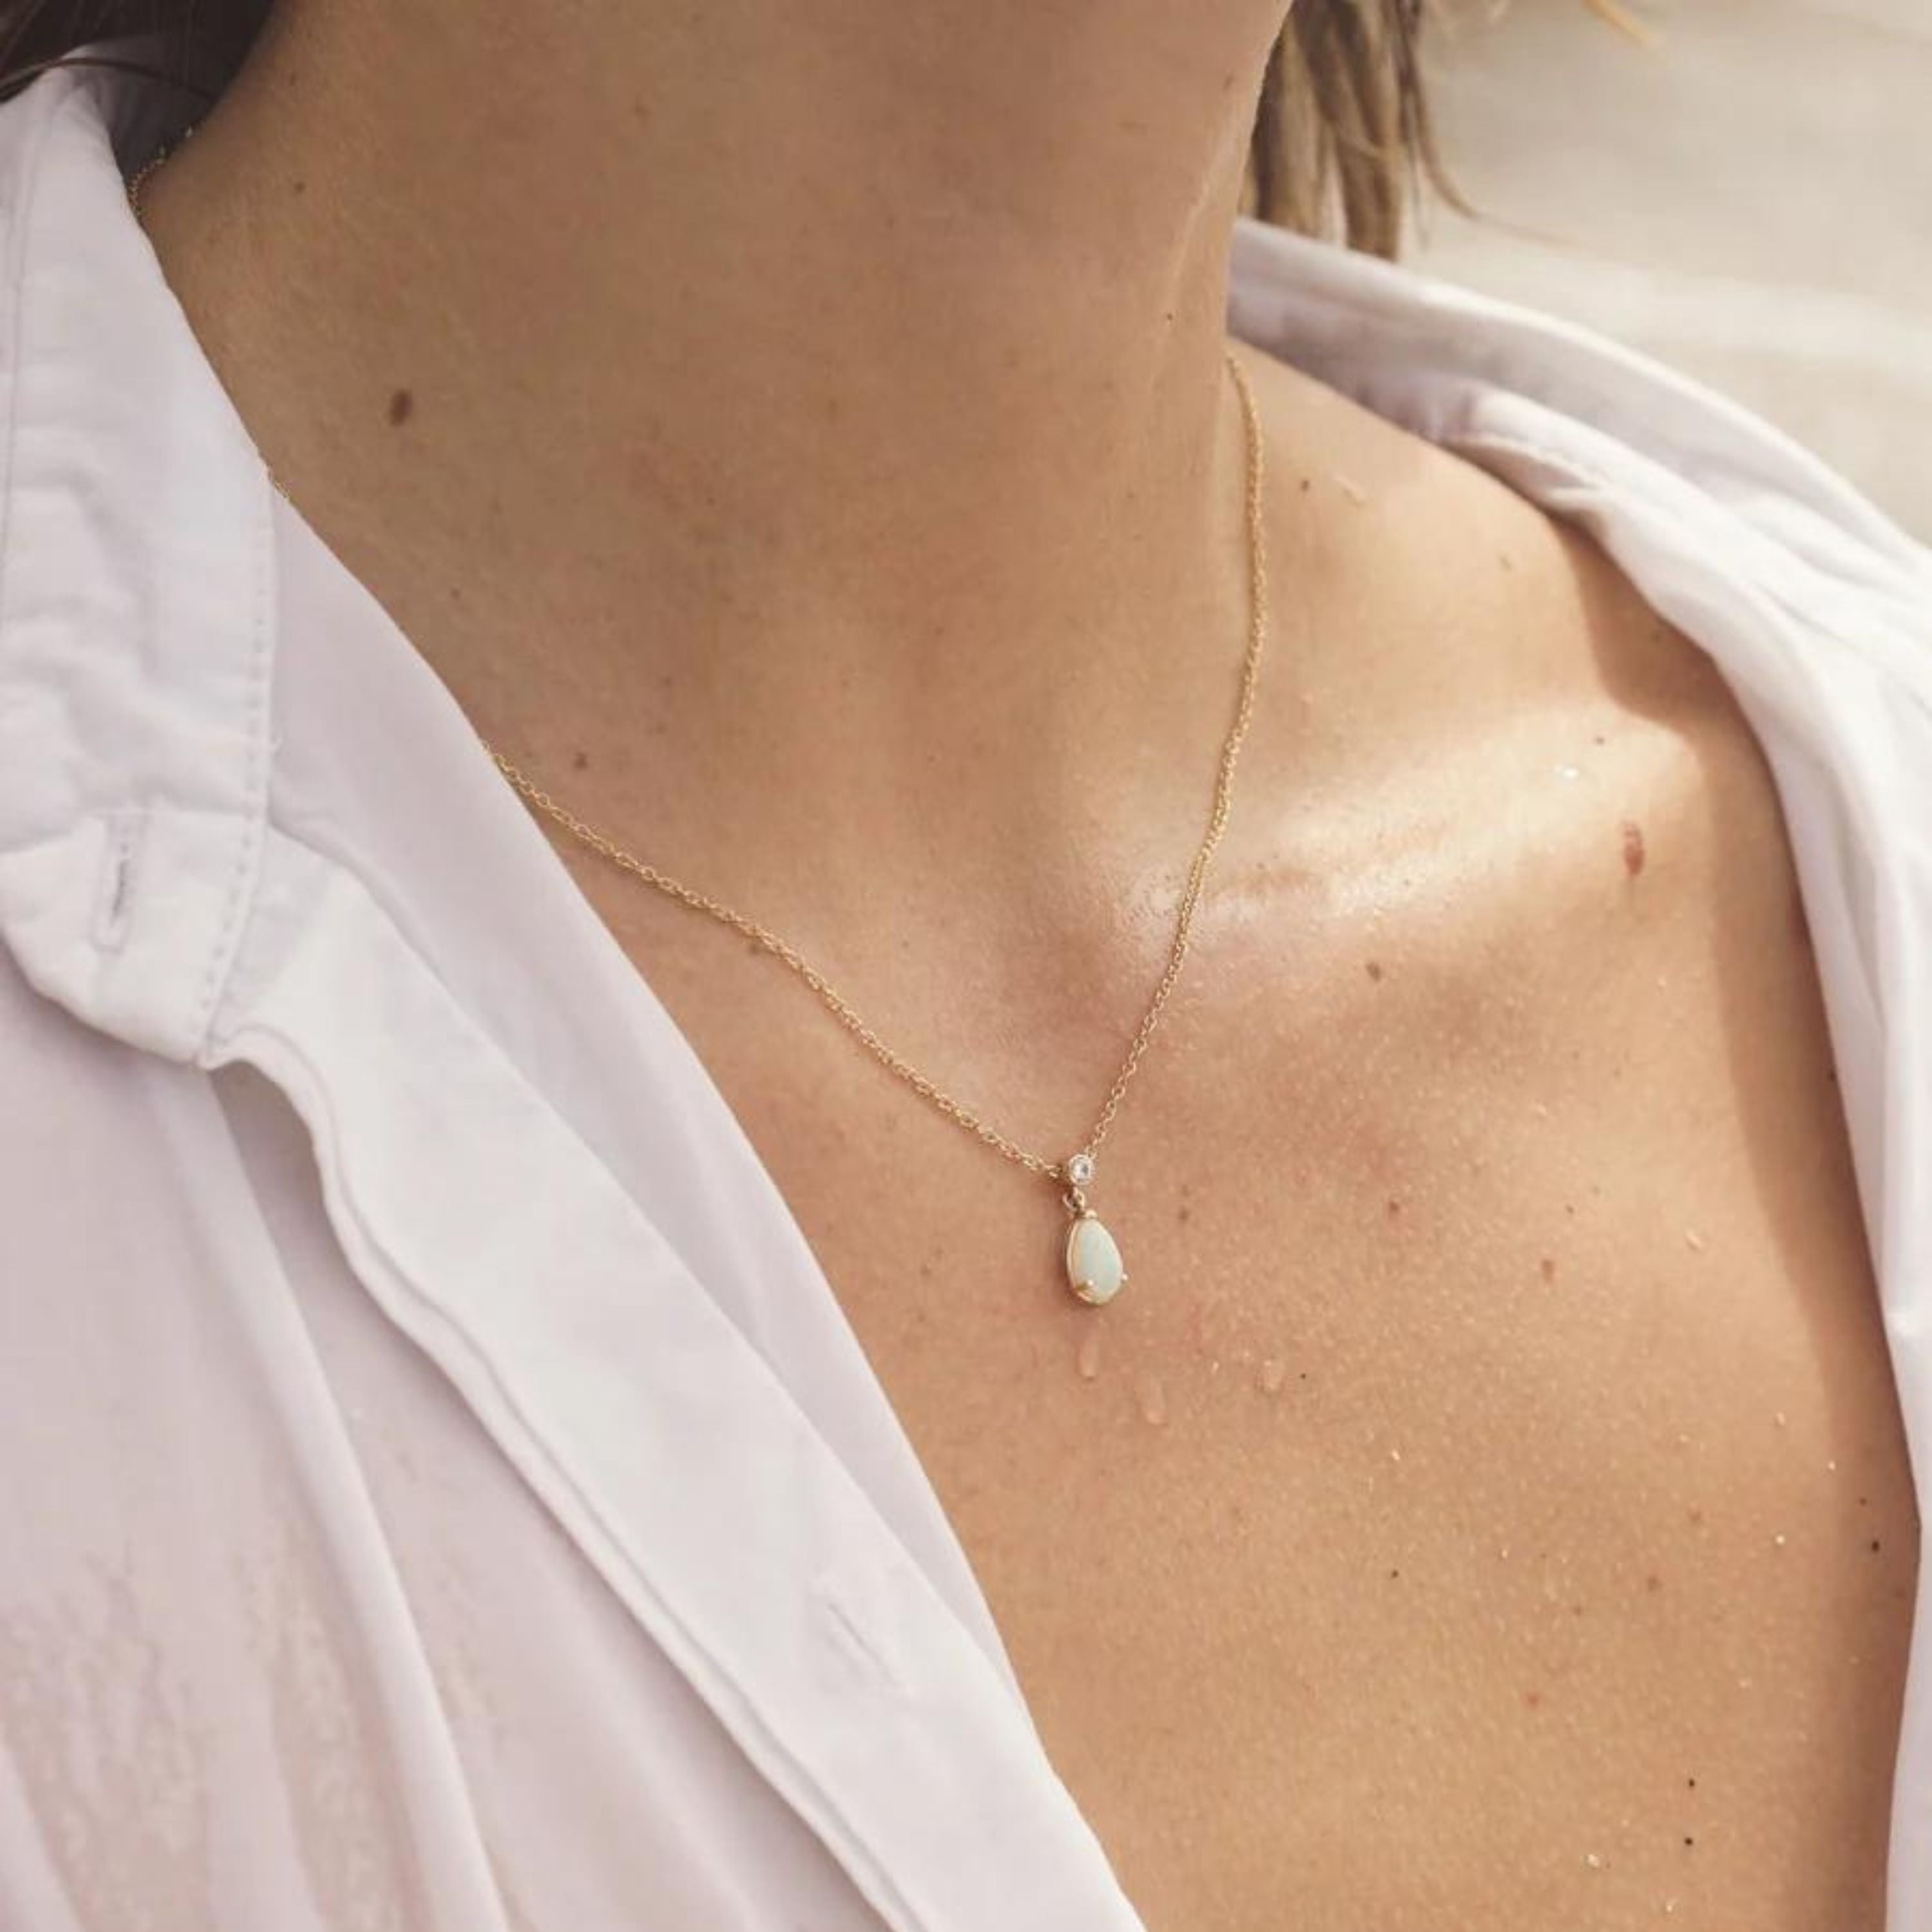 Water Drop Opal and Single Diamond Necklace